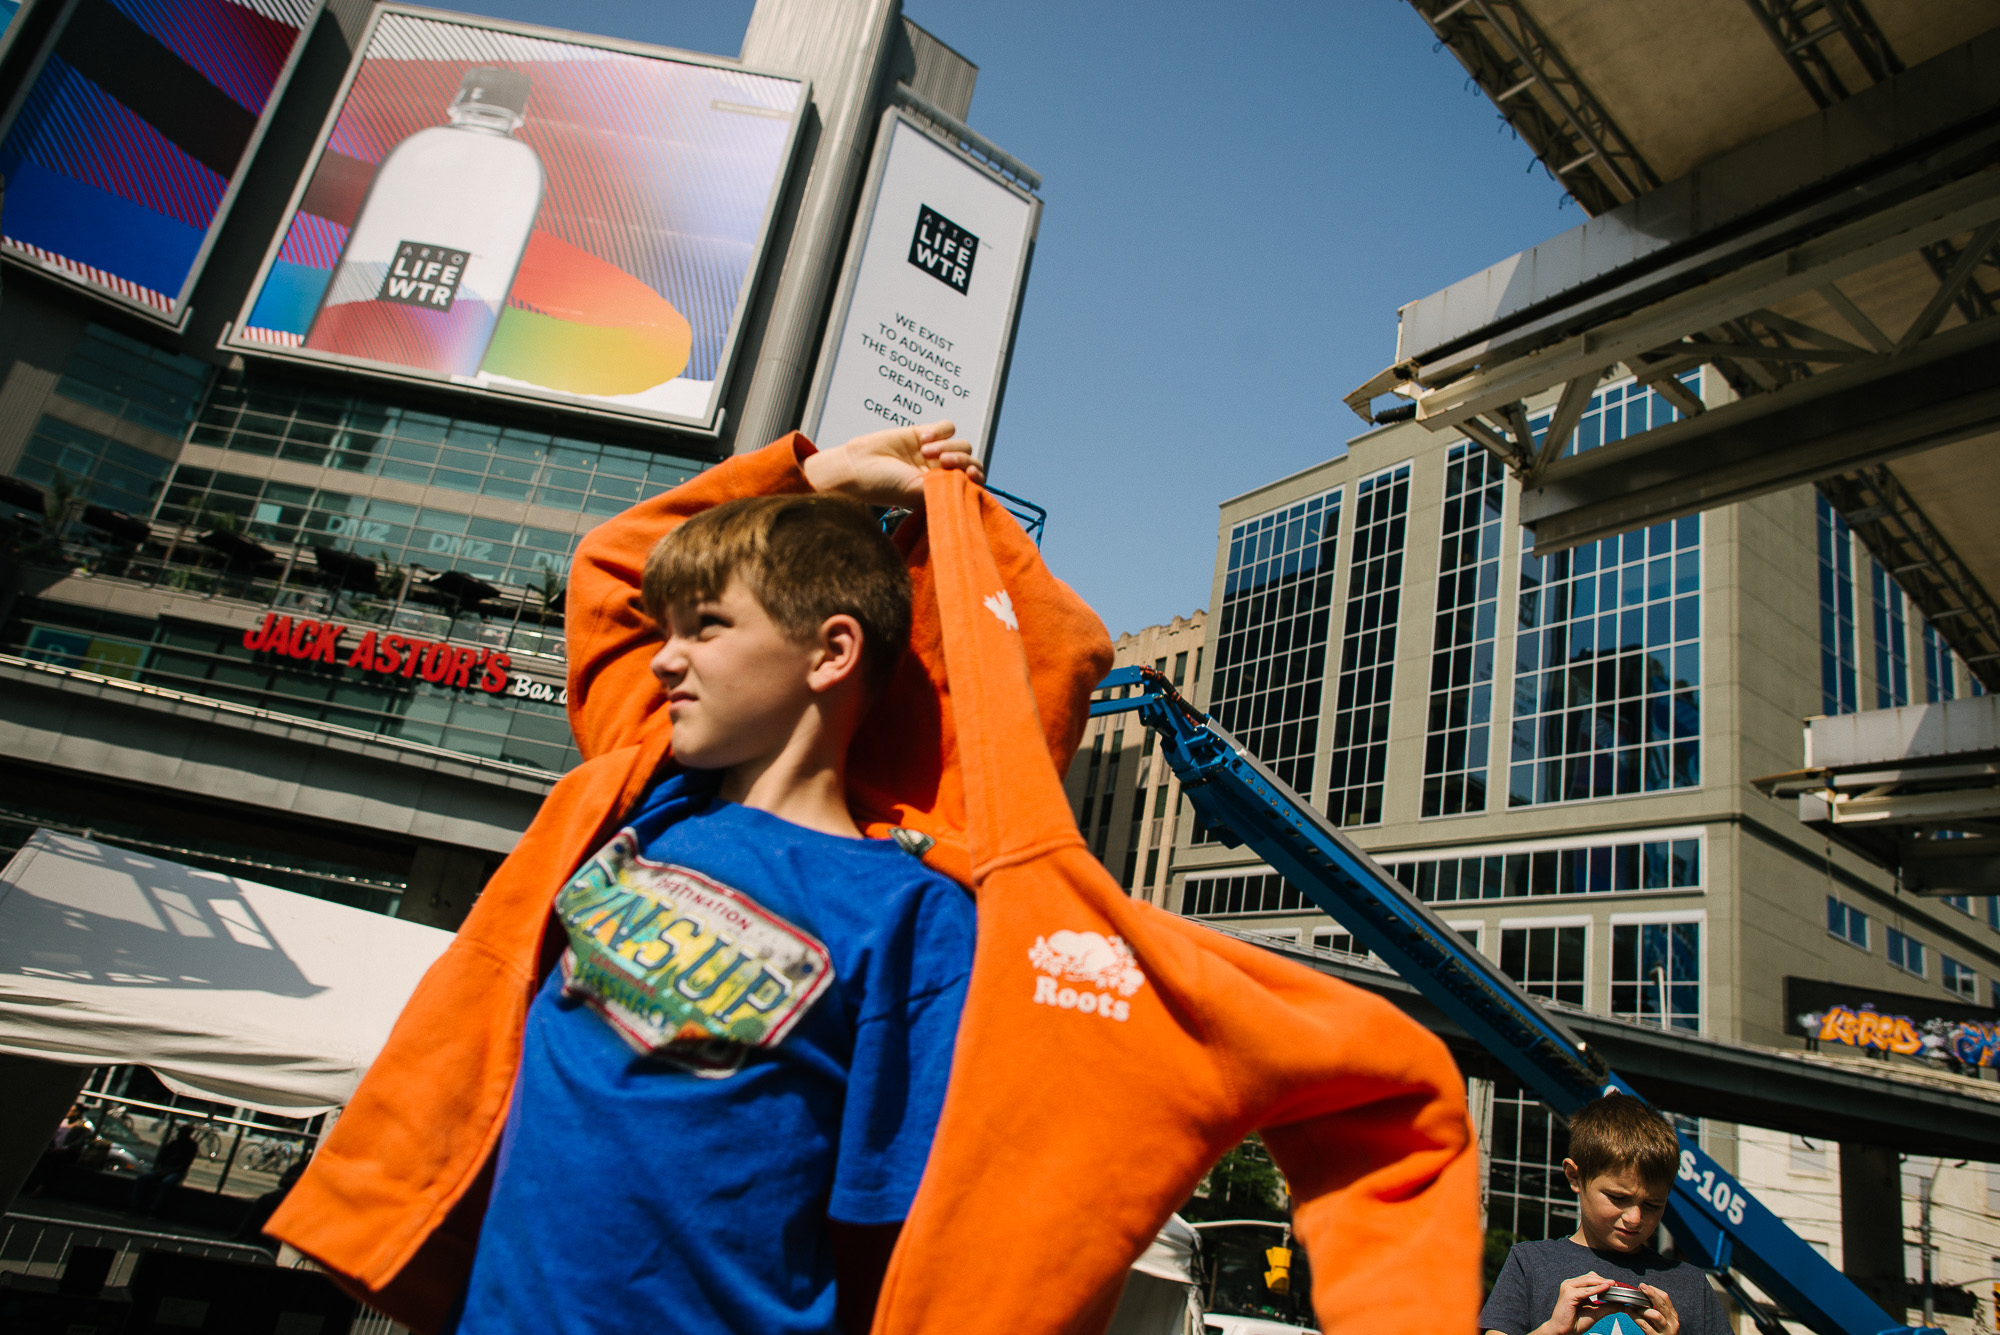 Boy with orange hooded sweatshirt stands in Dundas Square